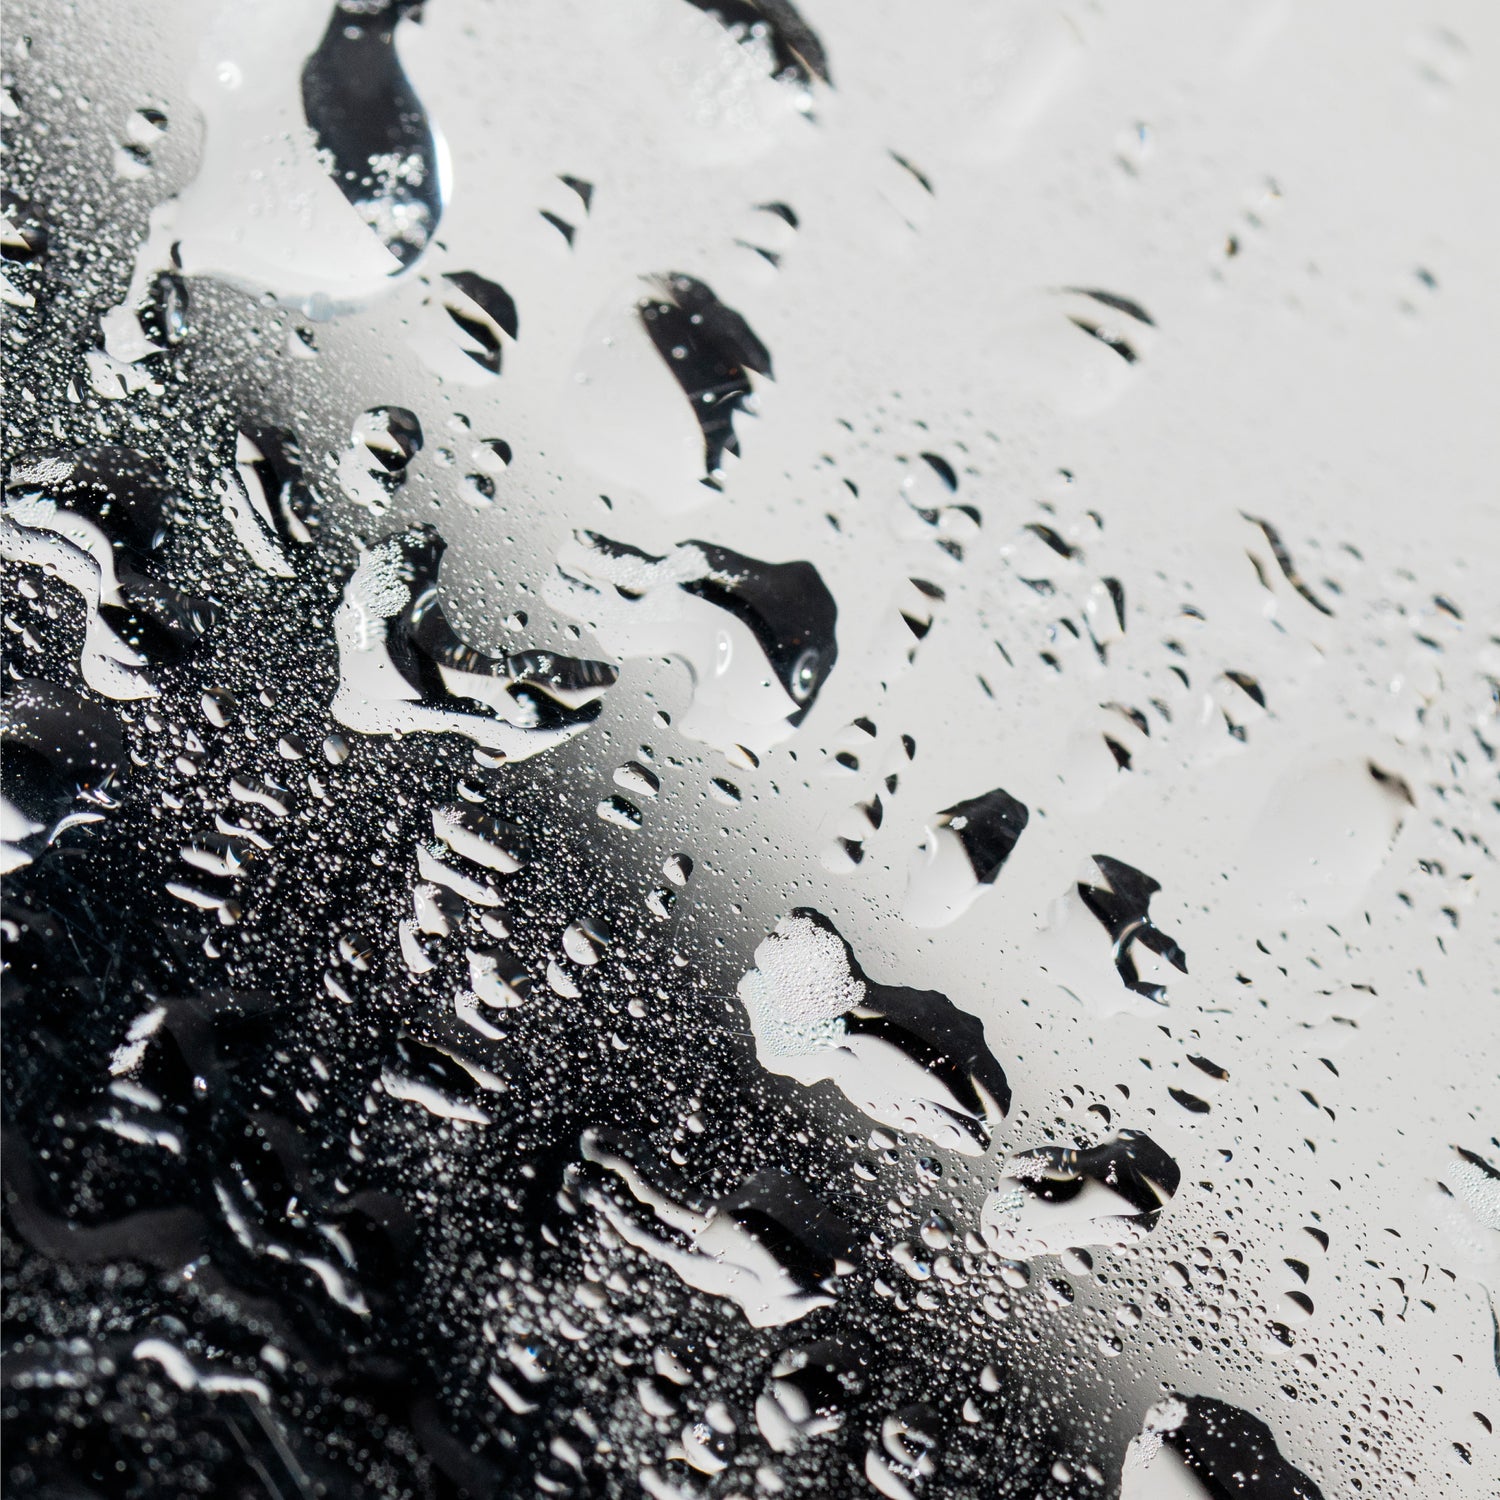 Water droplets sat on glass.